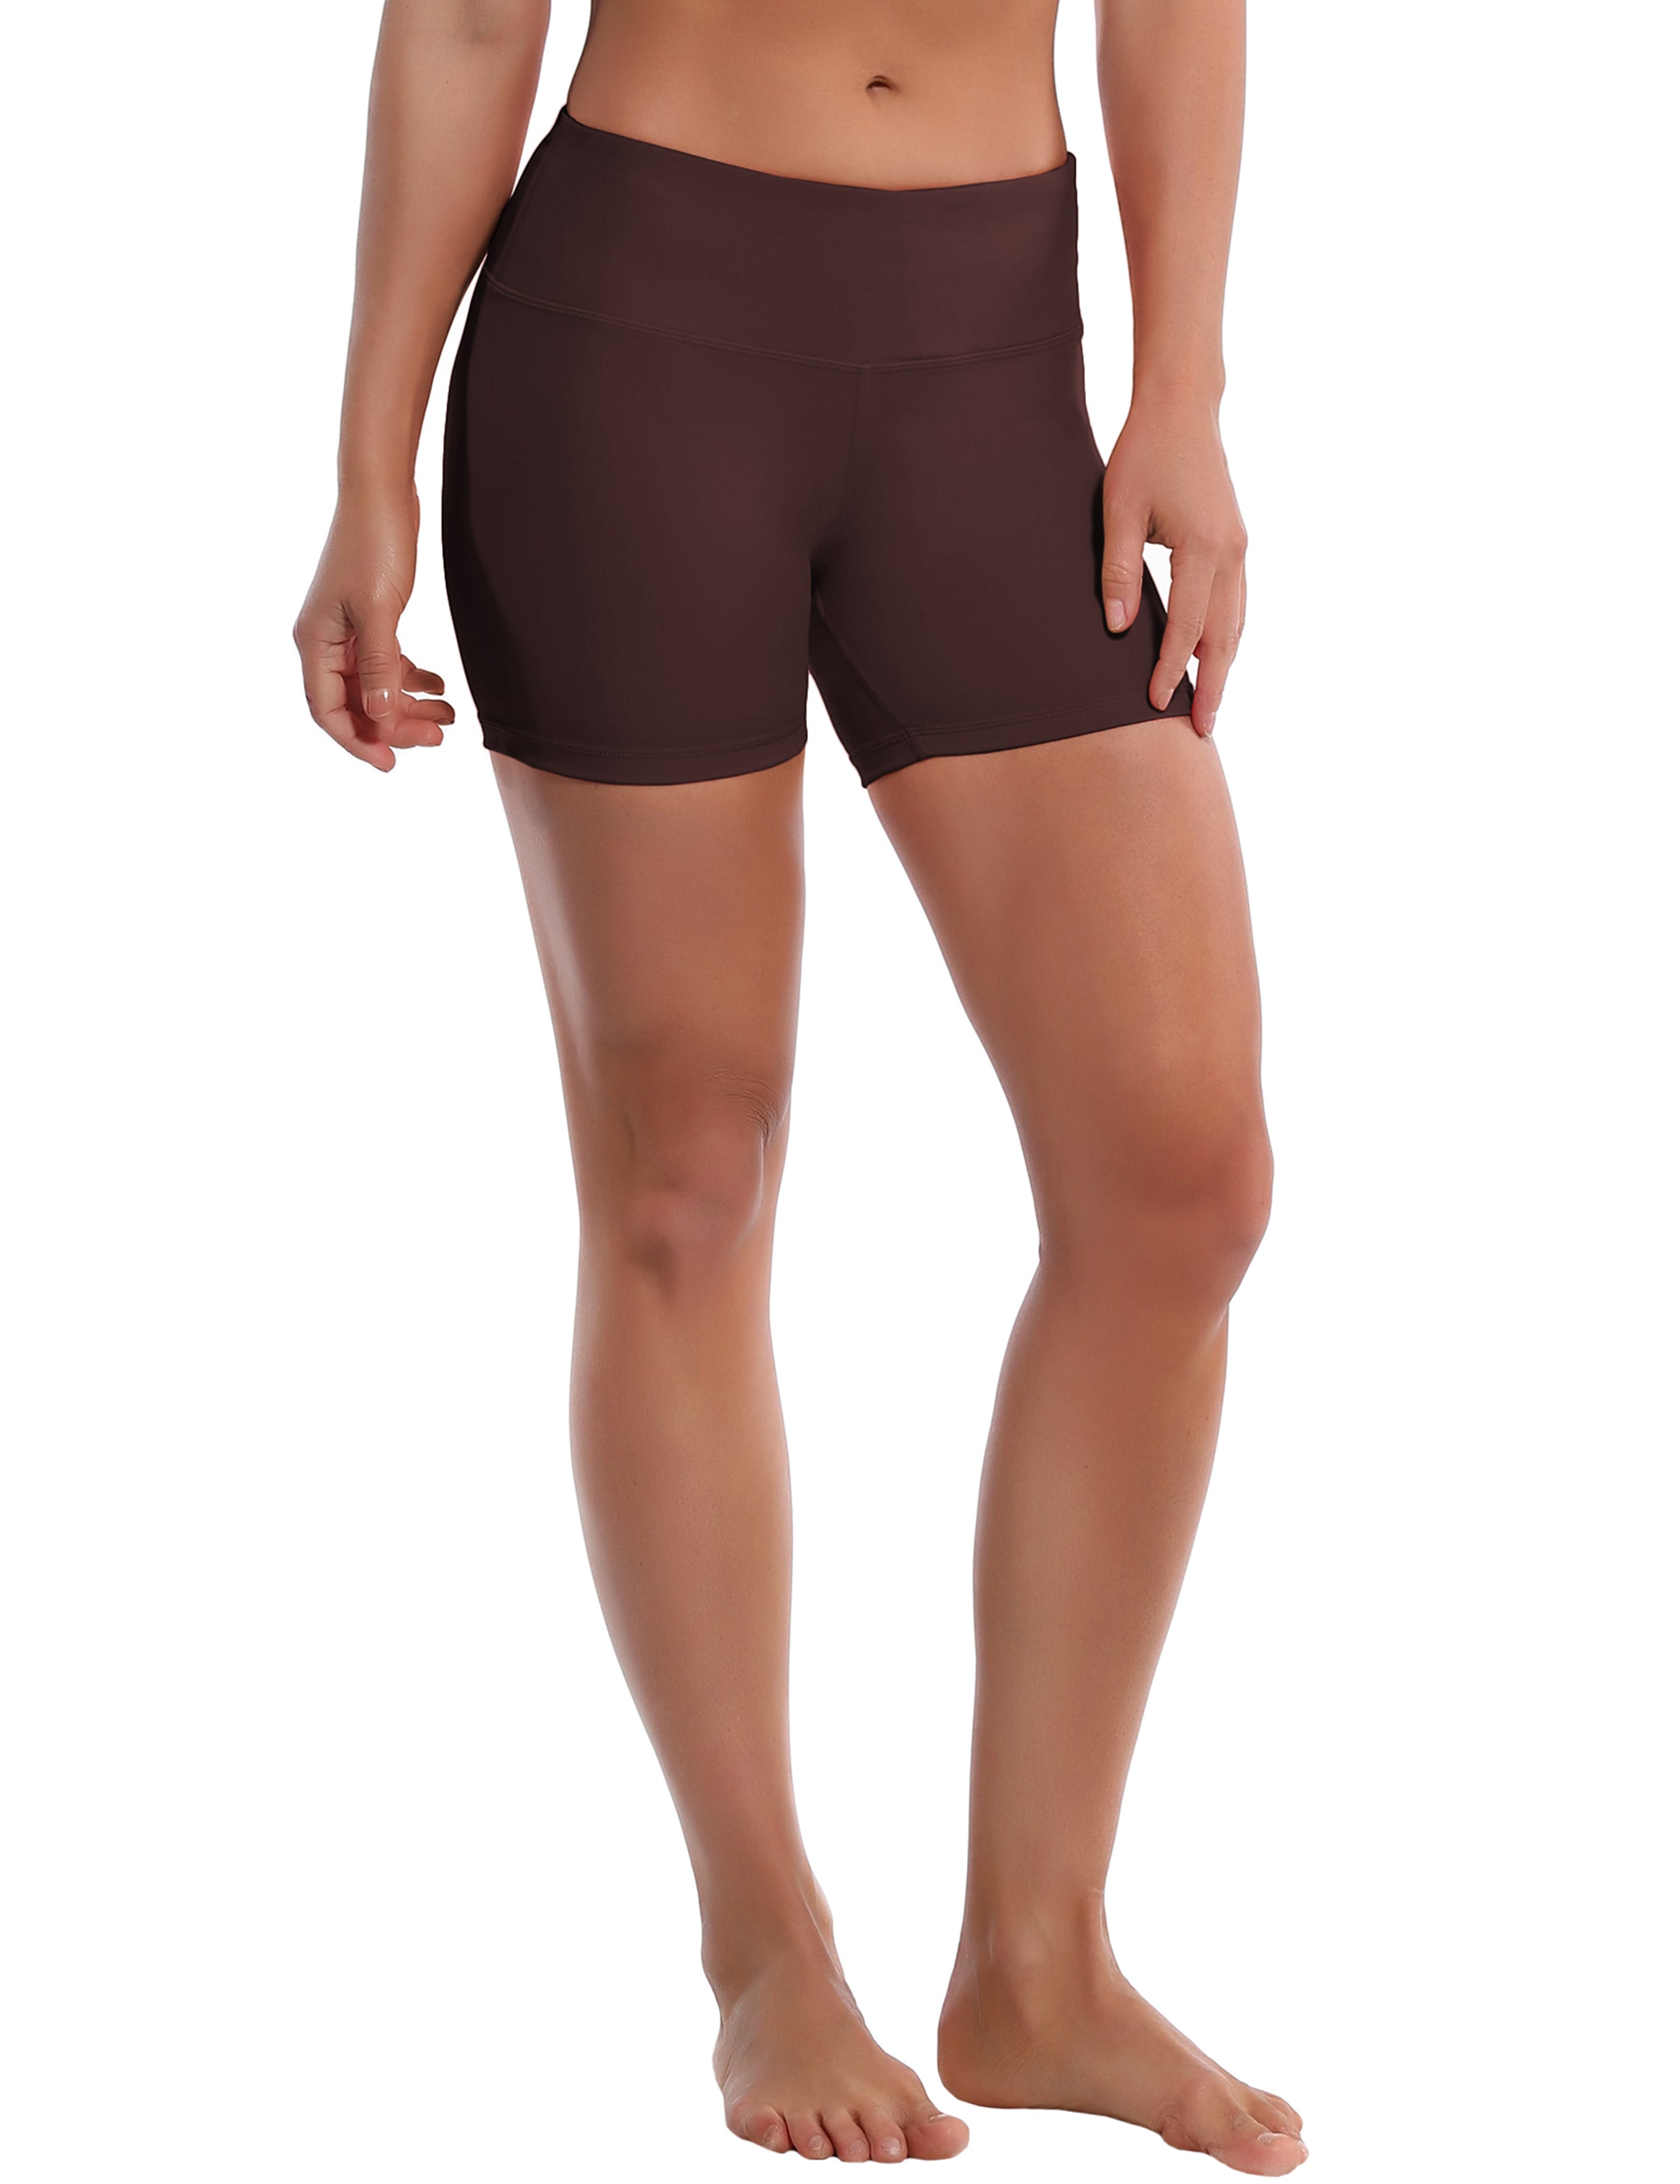 4" Pilates Shorts mahoganymaroon Sleek, soft, smooth and totally comfortable: our newest style is here. Softest-ever fabric High elasticity High density 4-way stretch Fabric doesn't attract lint easily No see-through Moisture-wicking Machine wash 75% Nylon, 25% Spandex